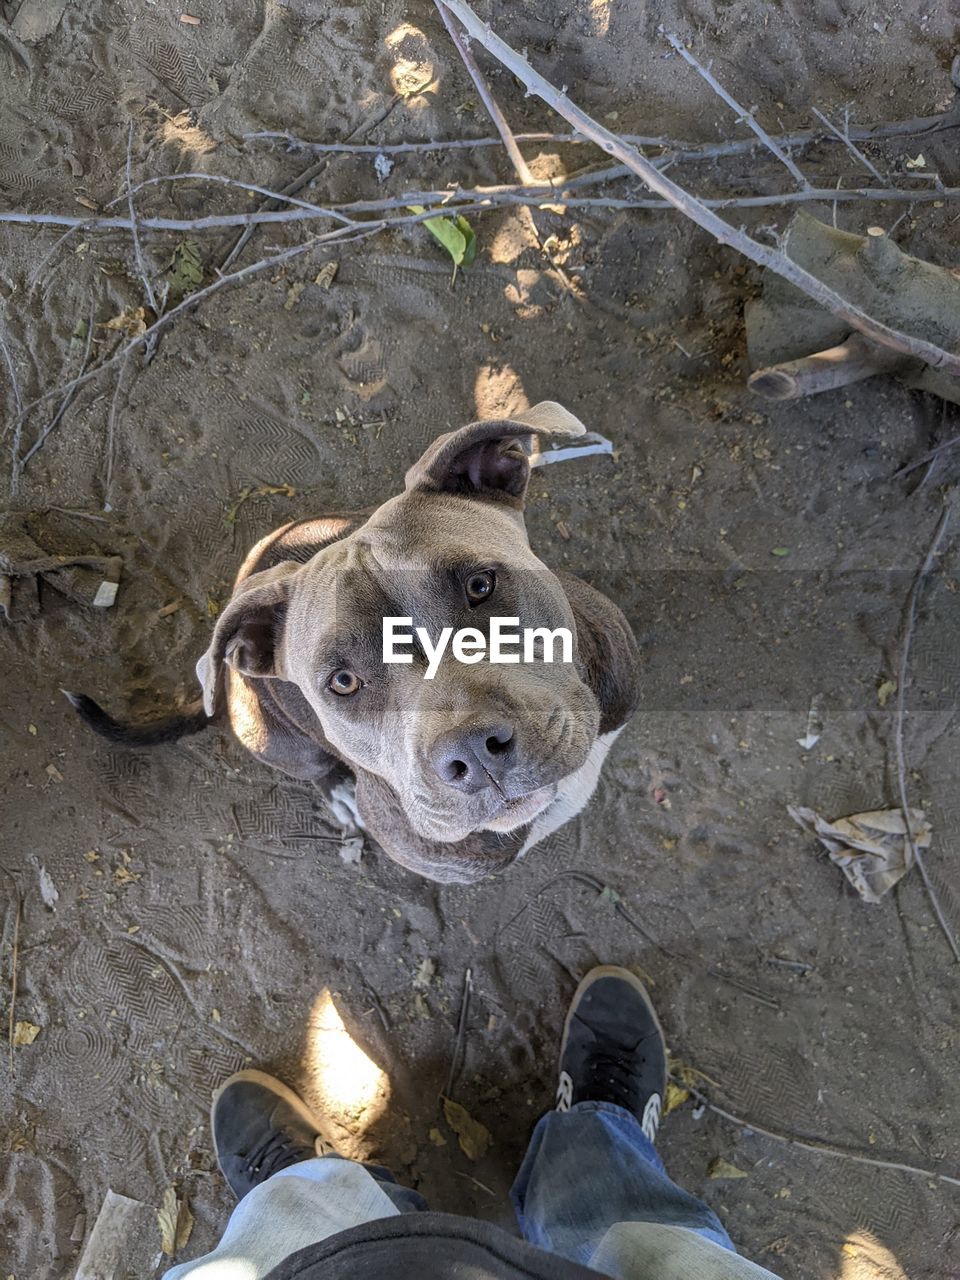 dog, pet, animal, animal themes, mammal, high angle view, one animal, canine, domestic animals, low section, shoe, human leg, personal perspective, standing, day, footwear, one person, portrait, outdoors, nature, directly above, lifestyles, carnivore, looking at camera